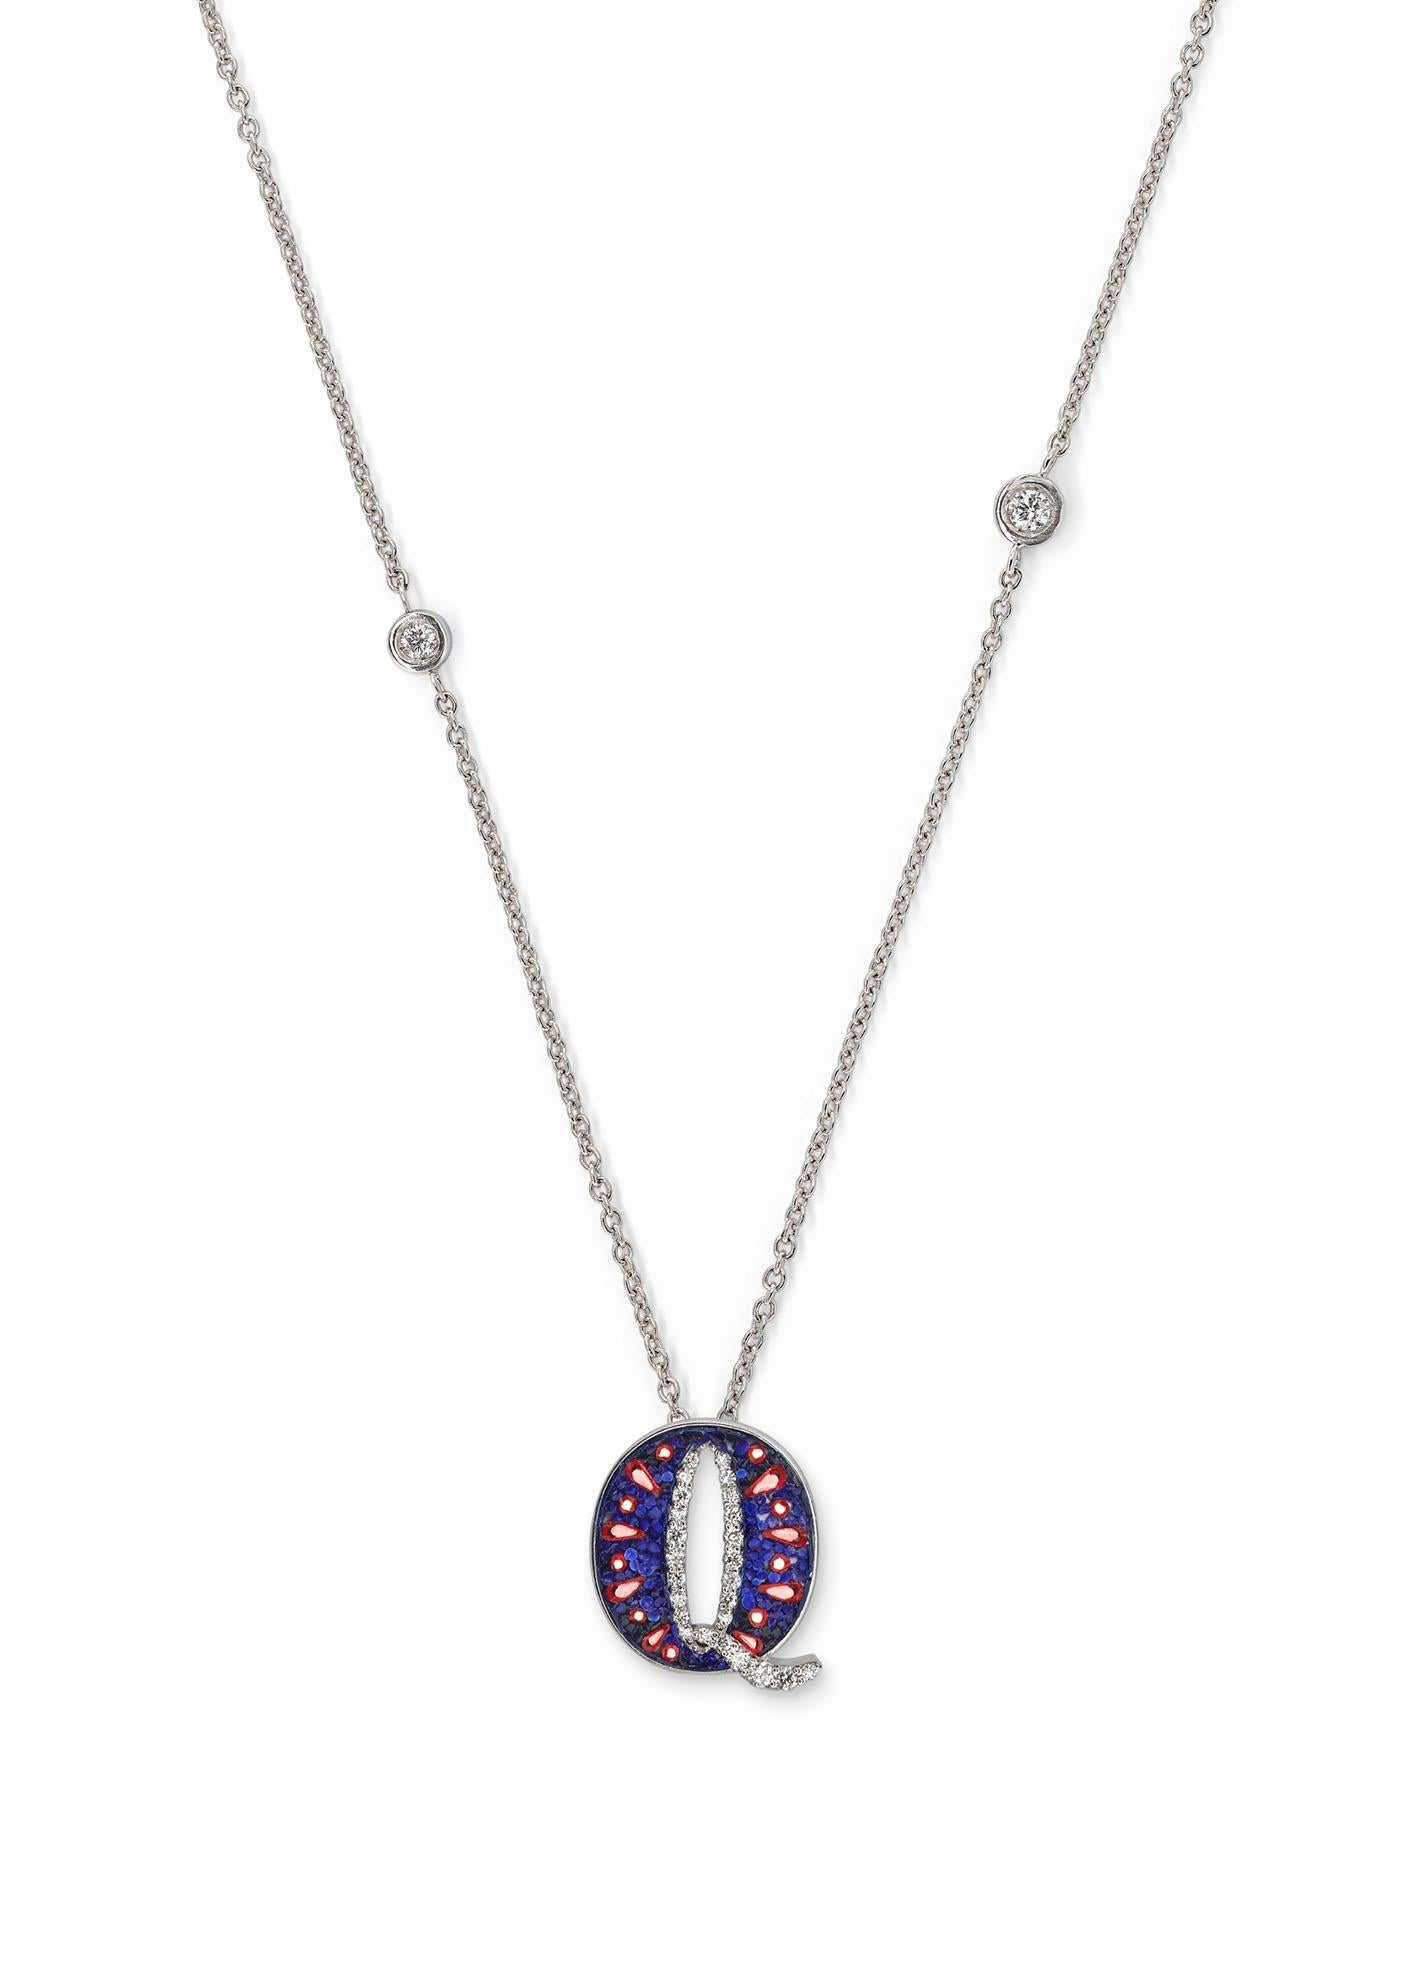 Contemporary Necklace Letter Q White Gold White Diamonds Hand Decorated with Micromosaic For Sale